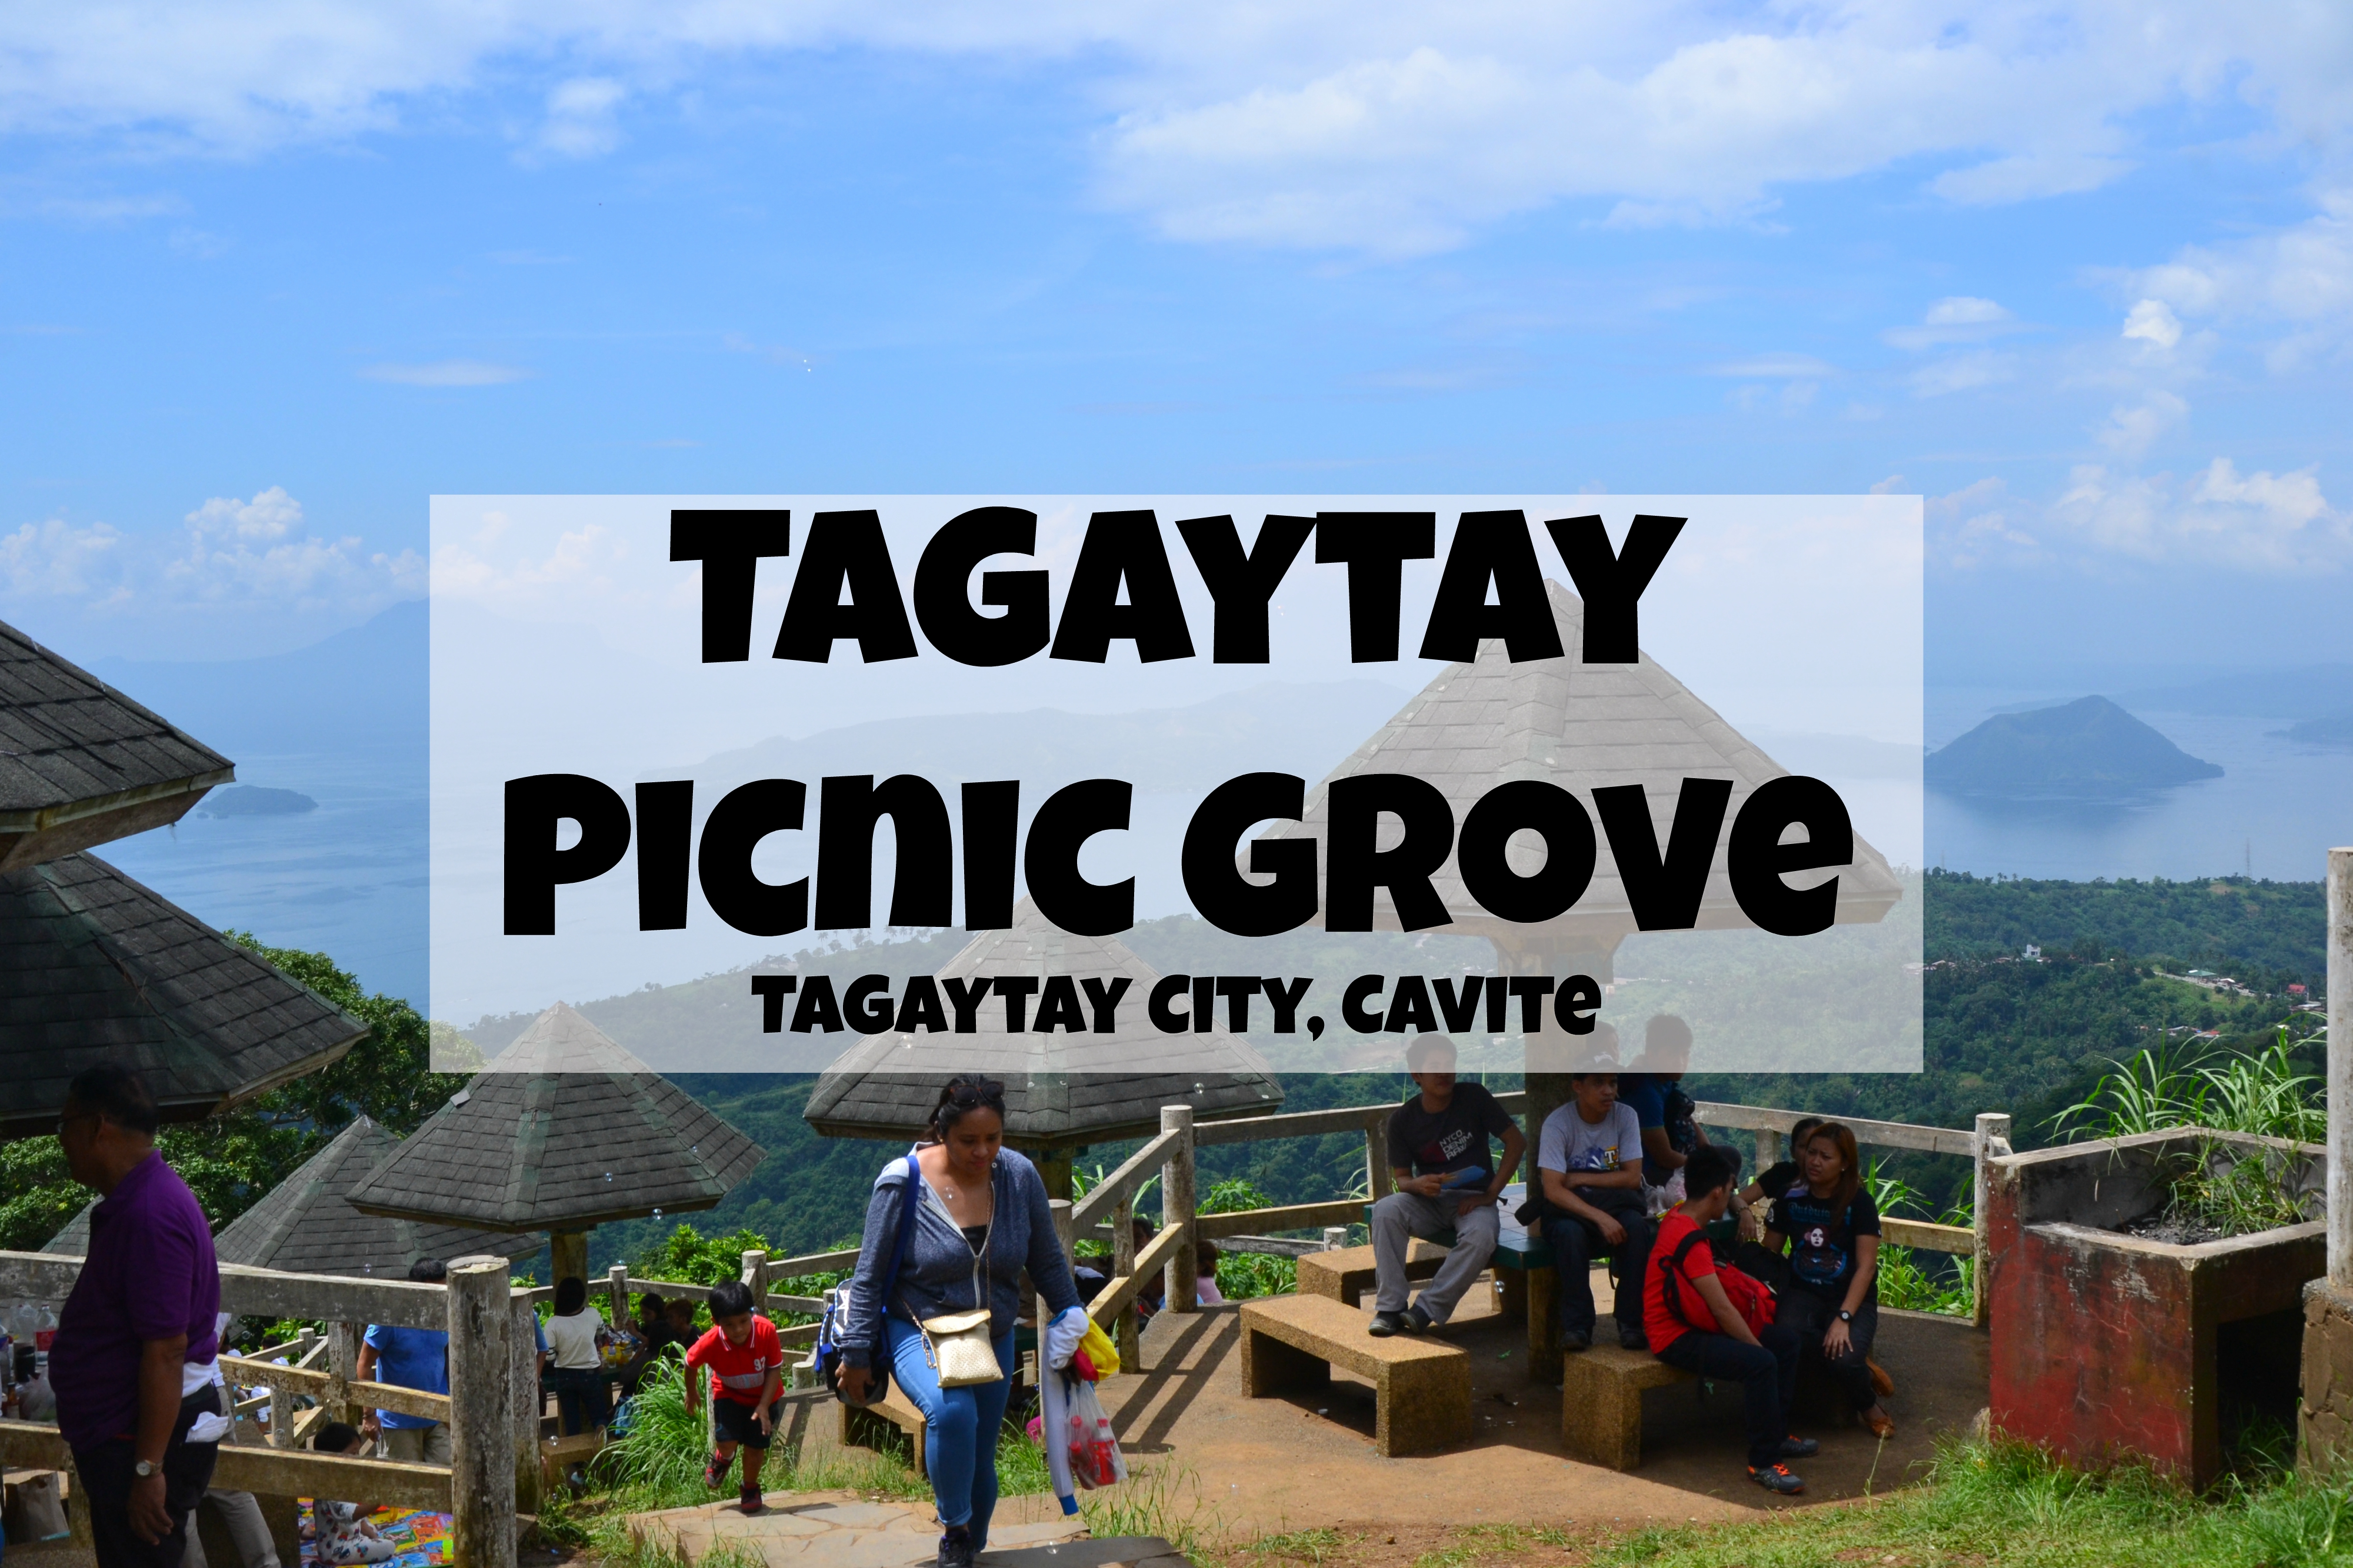 One of Tagaytay's most famous destinations, Tagaytay Picnic Grove is a perfect place to enjoy the view of Taal Volcano and Taal Lake.